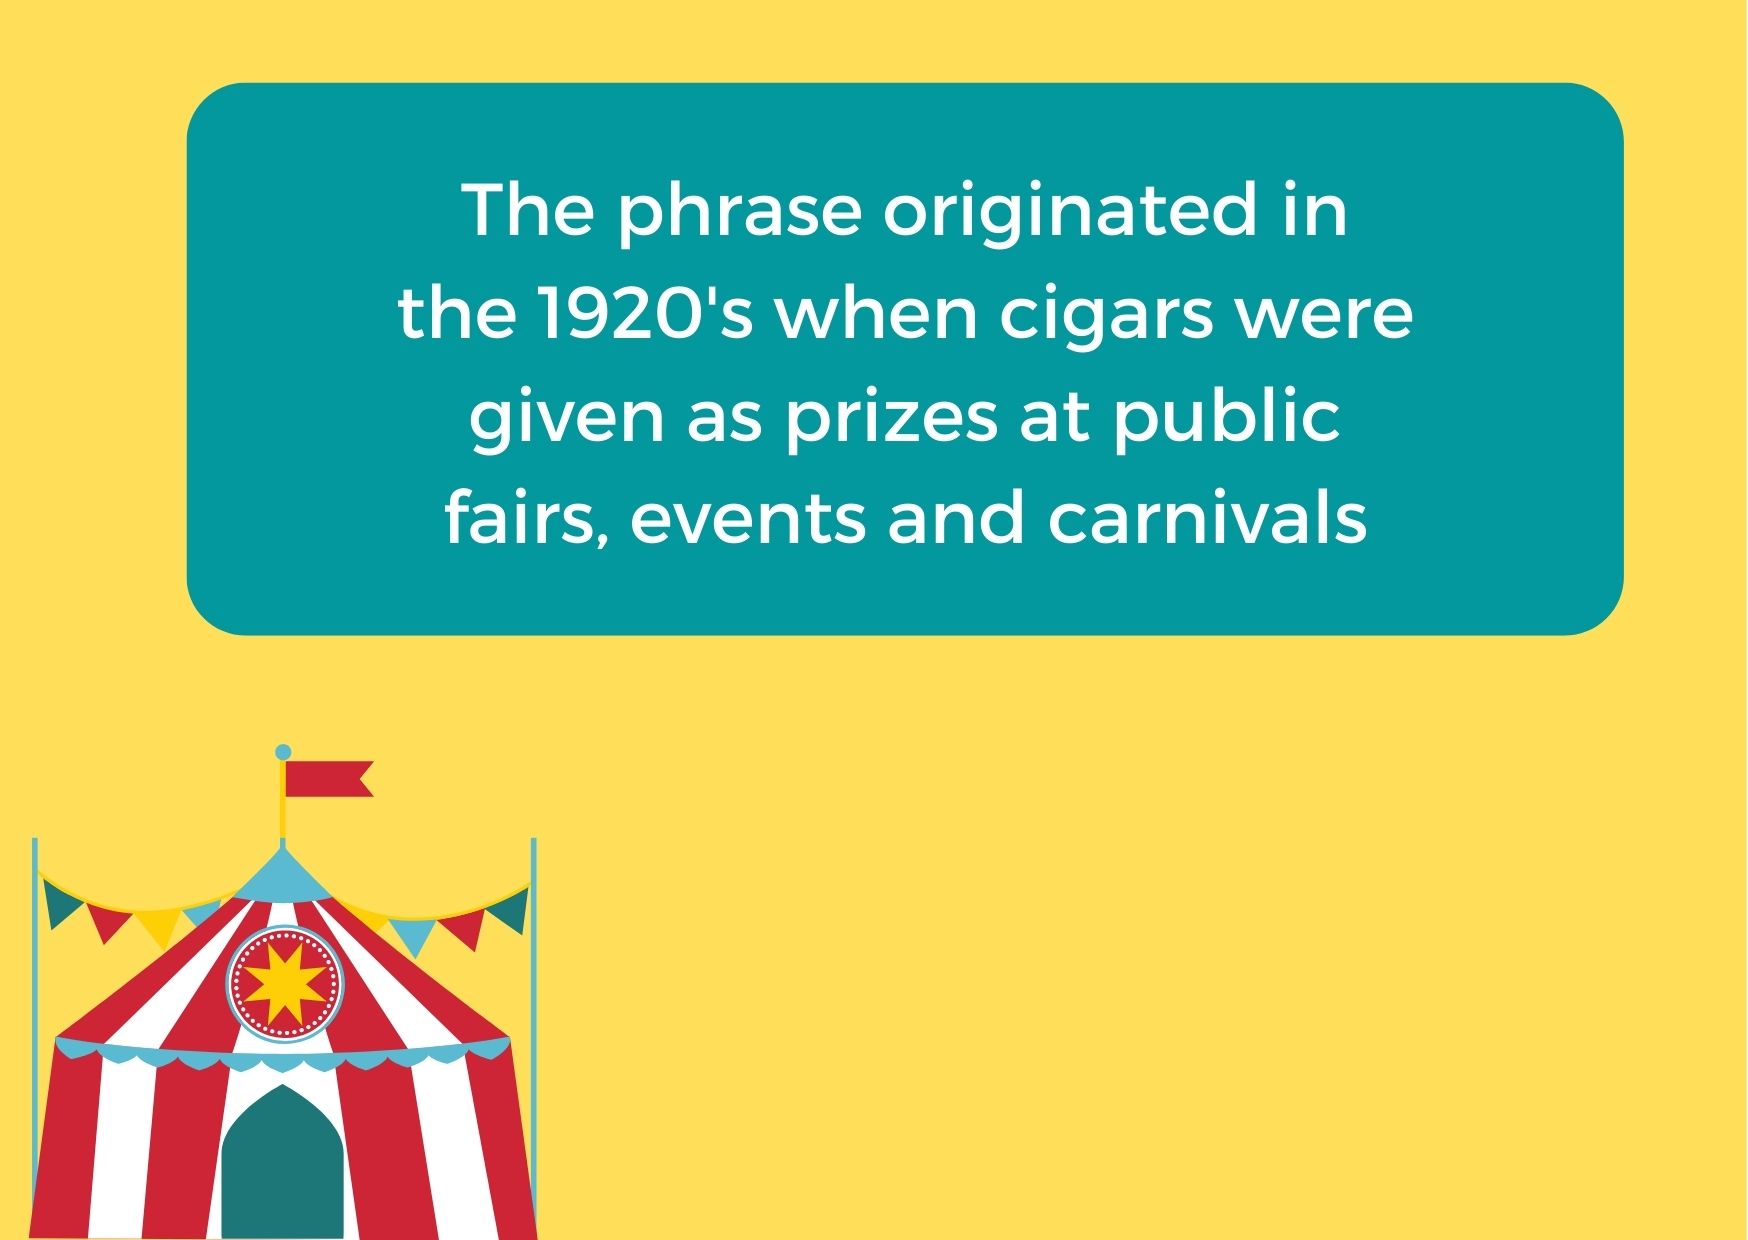 A graphic of a carnival with the caption: "The phrase originated in the 1920's when cigars were given as prizes at public fairs, events and carnivals"